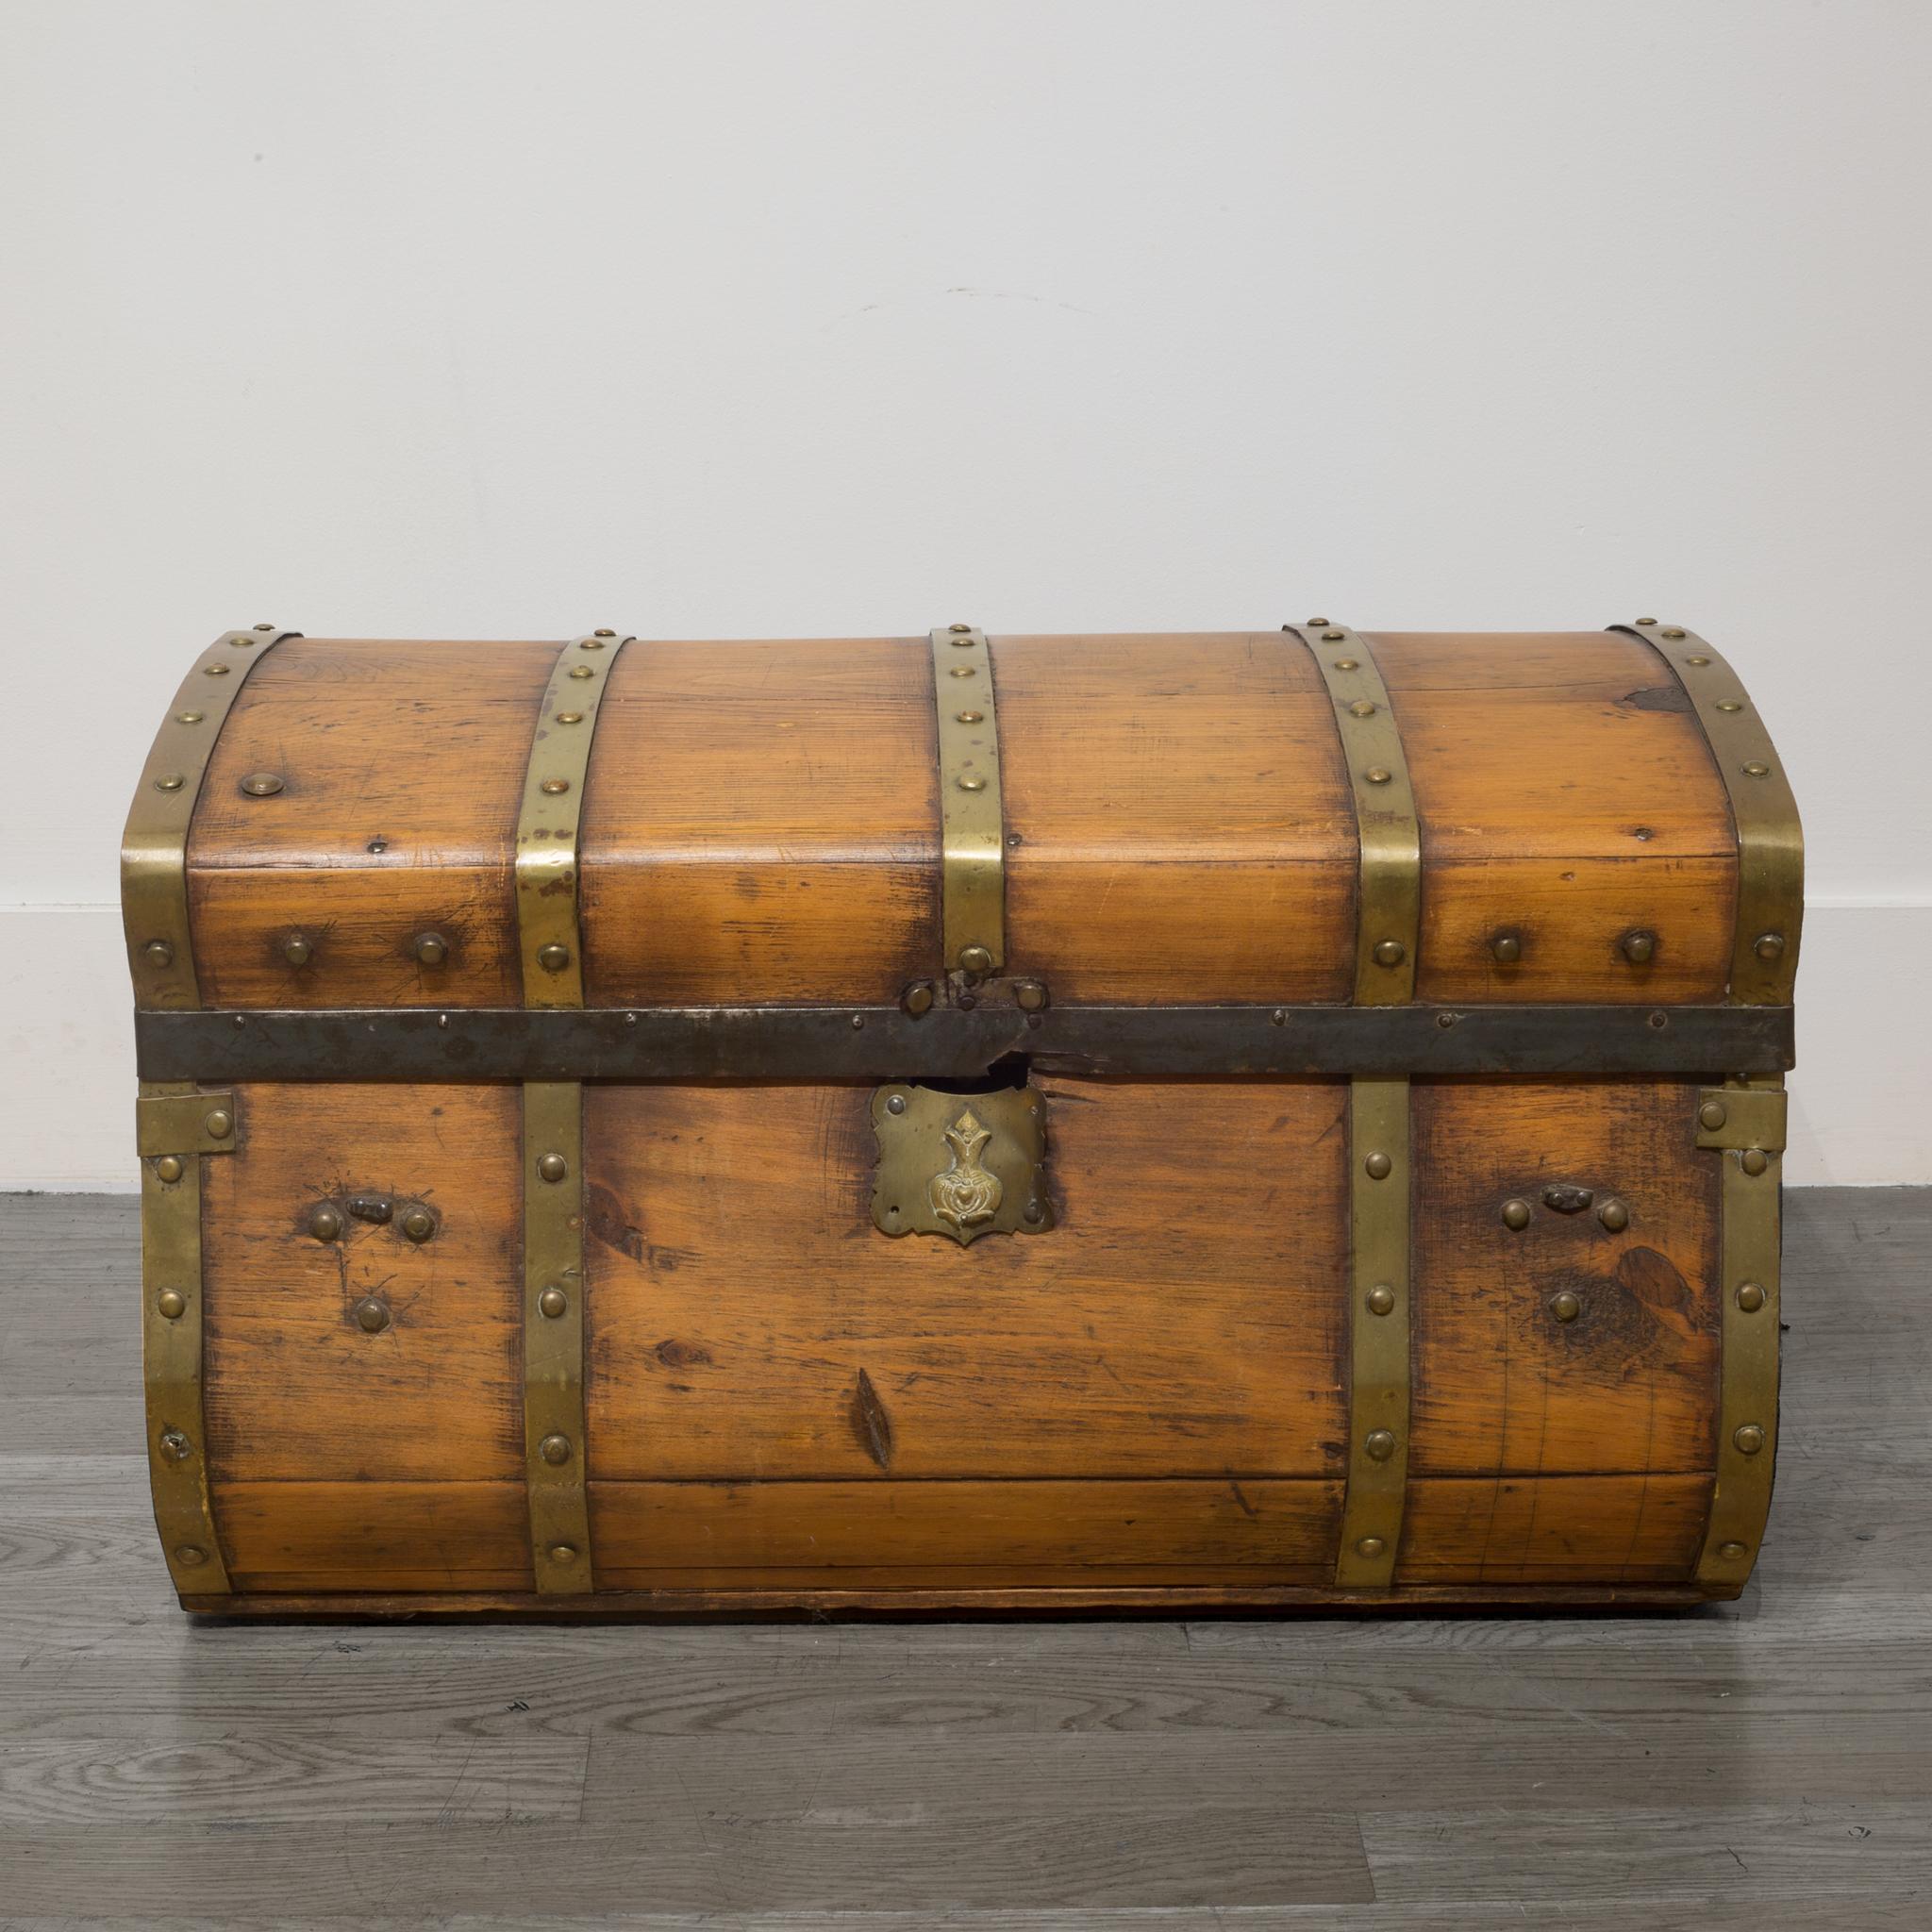 ABOUT

This is an original Jenny Lind wooden dome trunk with brass bands and lock. These trunks were used regularly on stagecoaches. The interior was lined later. This piece has retained its original finish.

 CREATOR Unknown.
 DATE OF